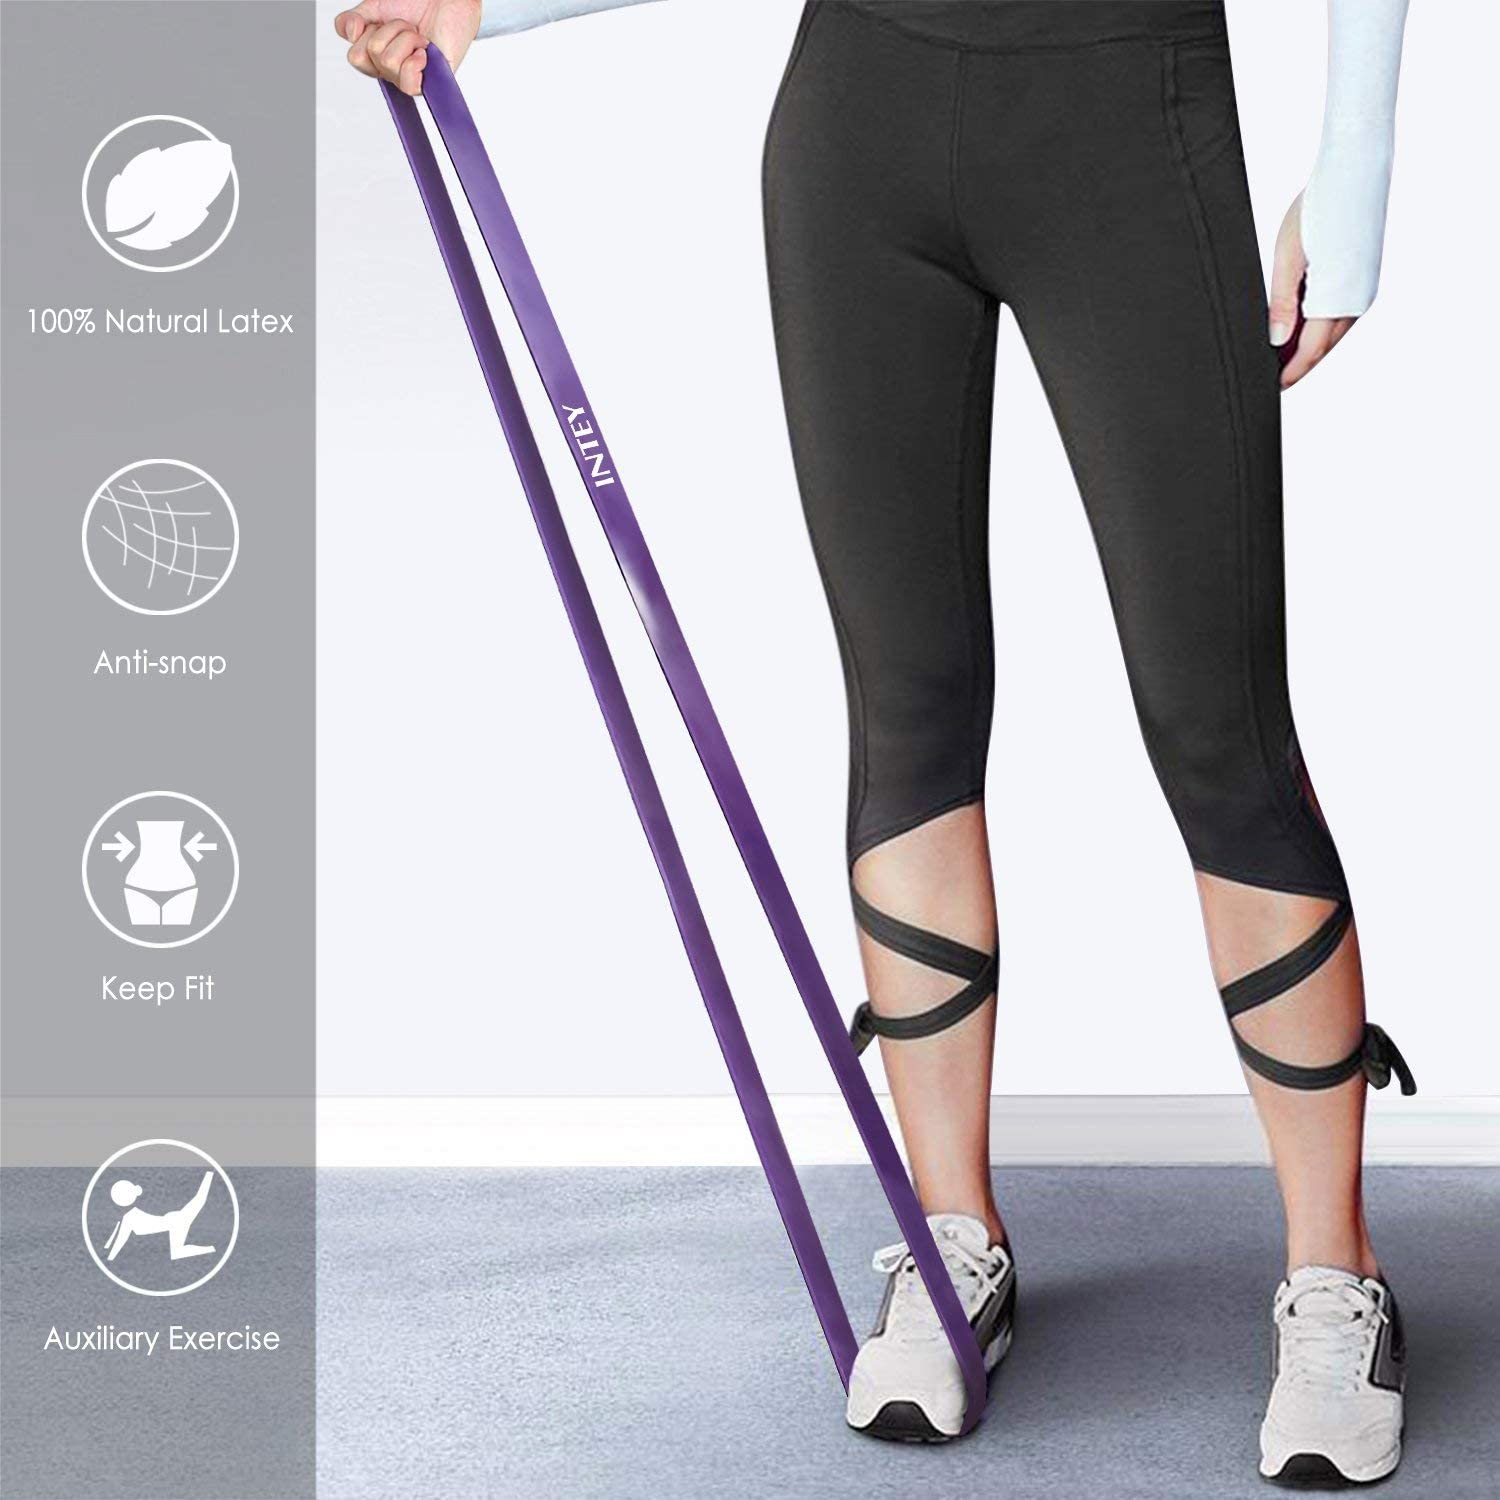 Dyna Band Resistance Exercise Band Gym Keep Fit Yoga Pilates Purple Strength Kit 